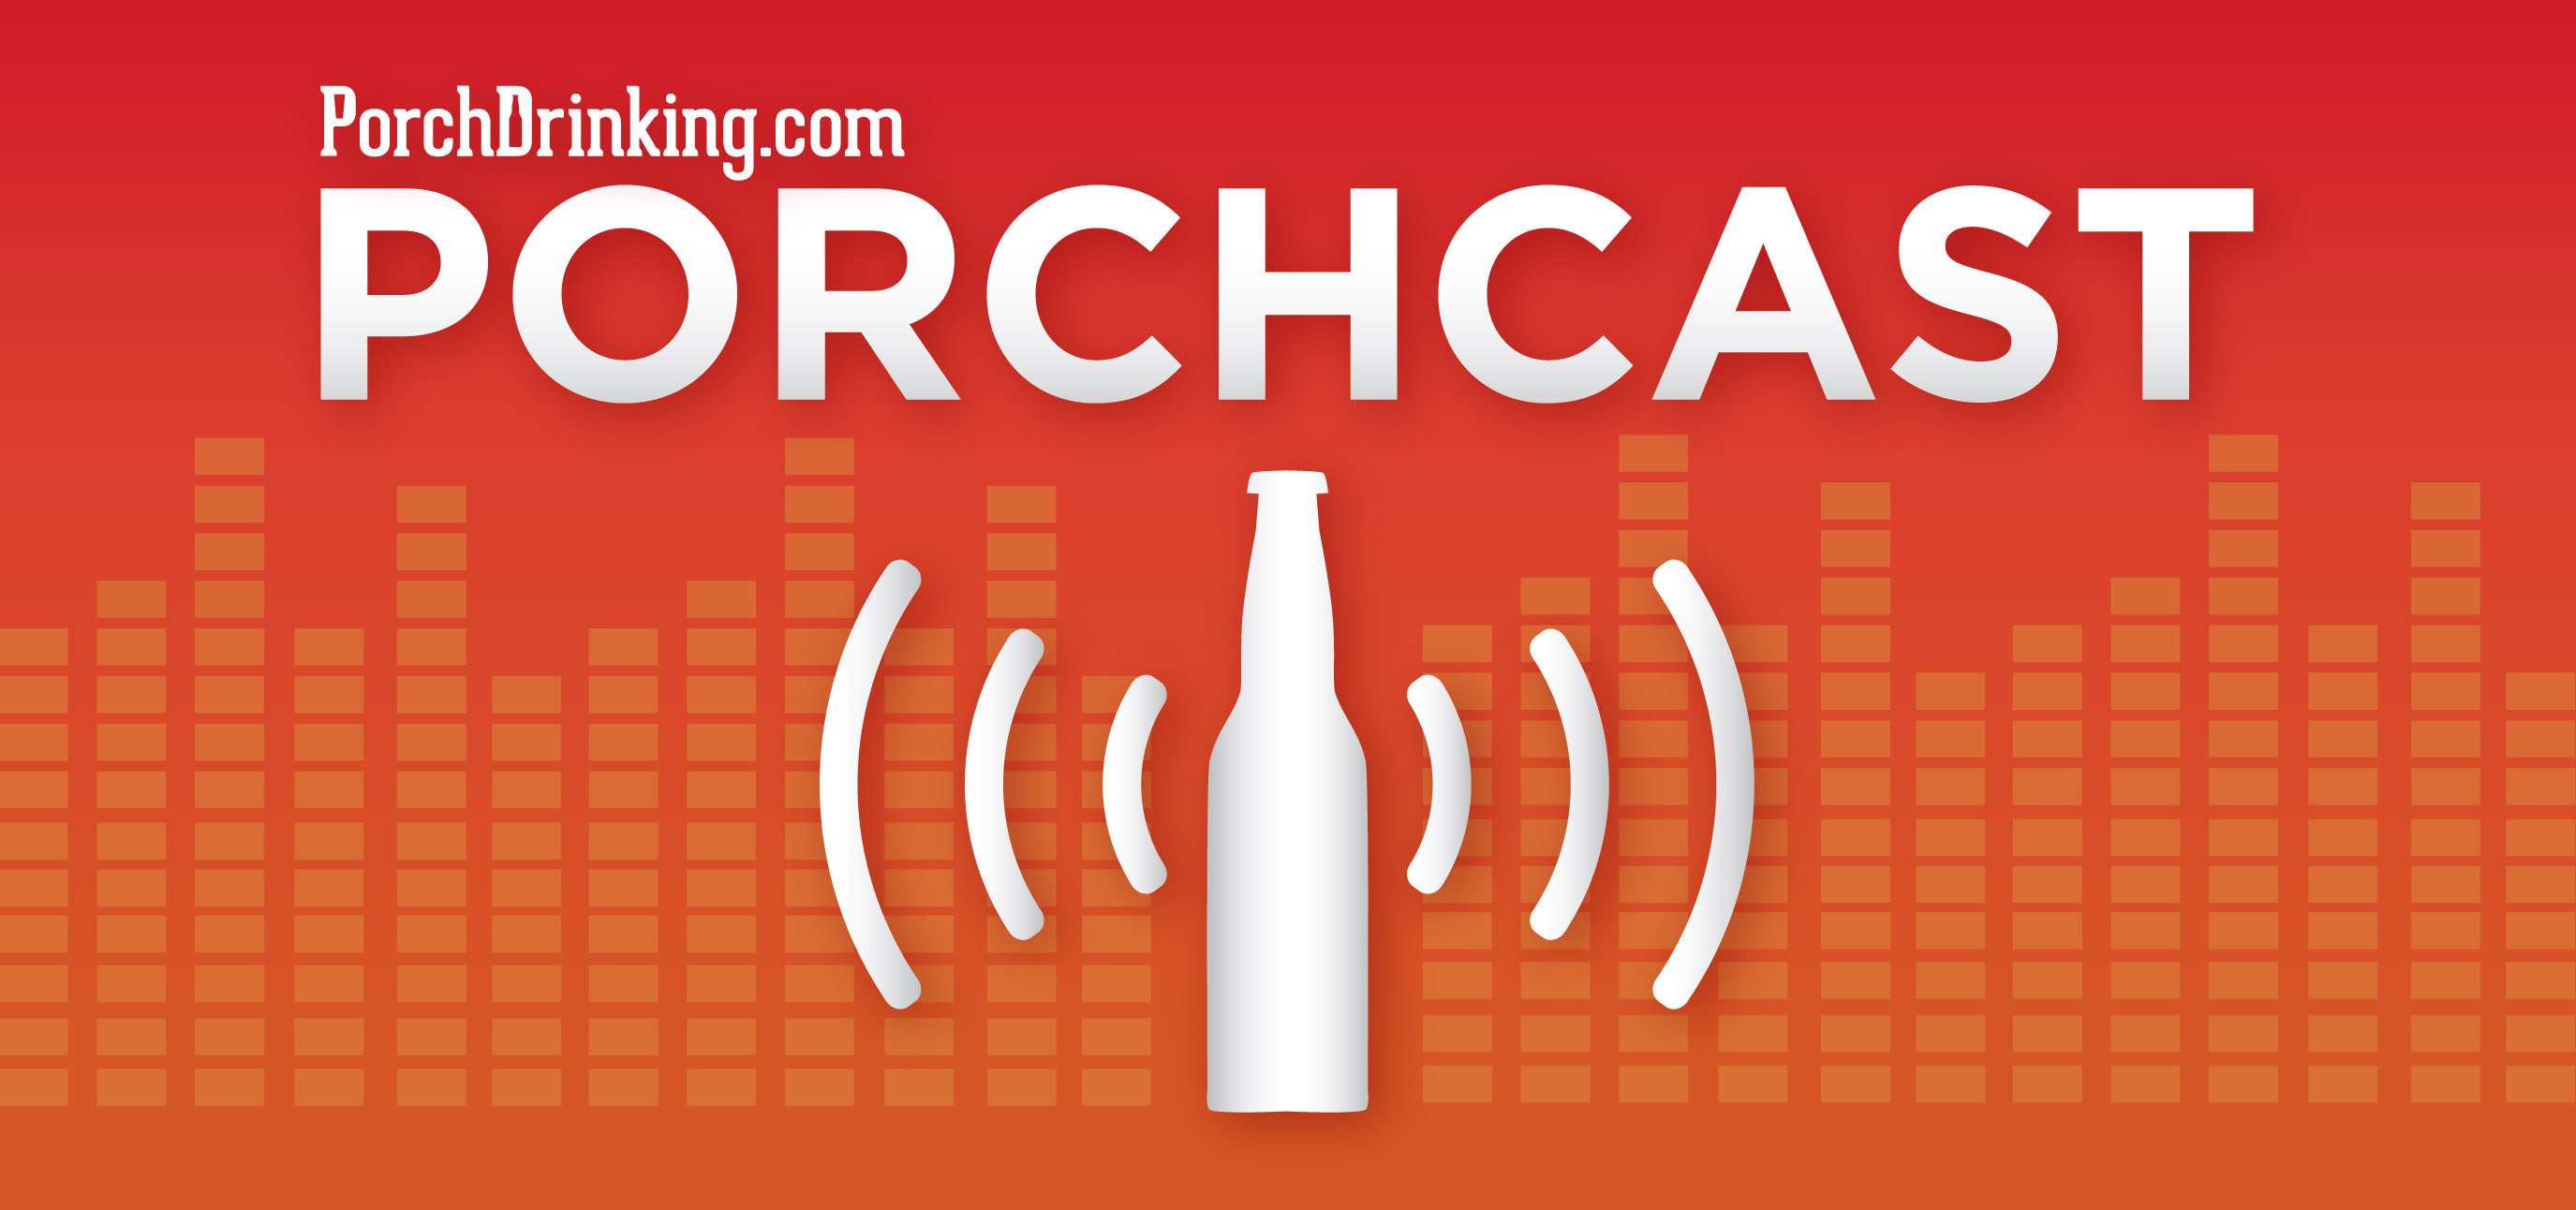 The PorchCast | Episode 9 – Eric Ponce at Vail Big Beers